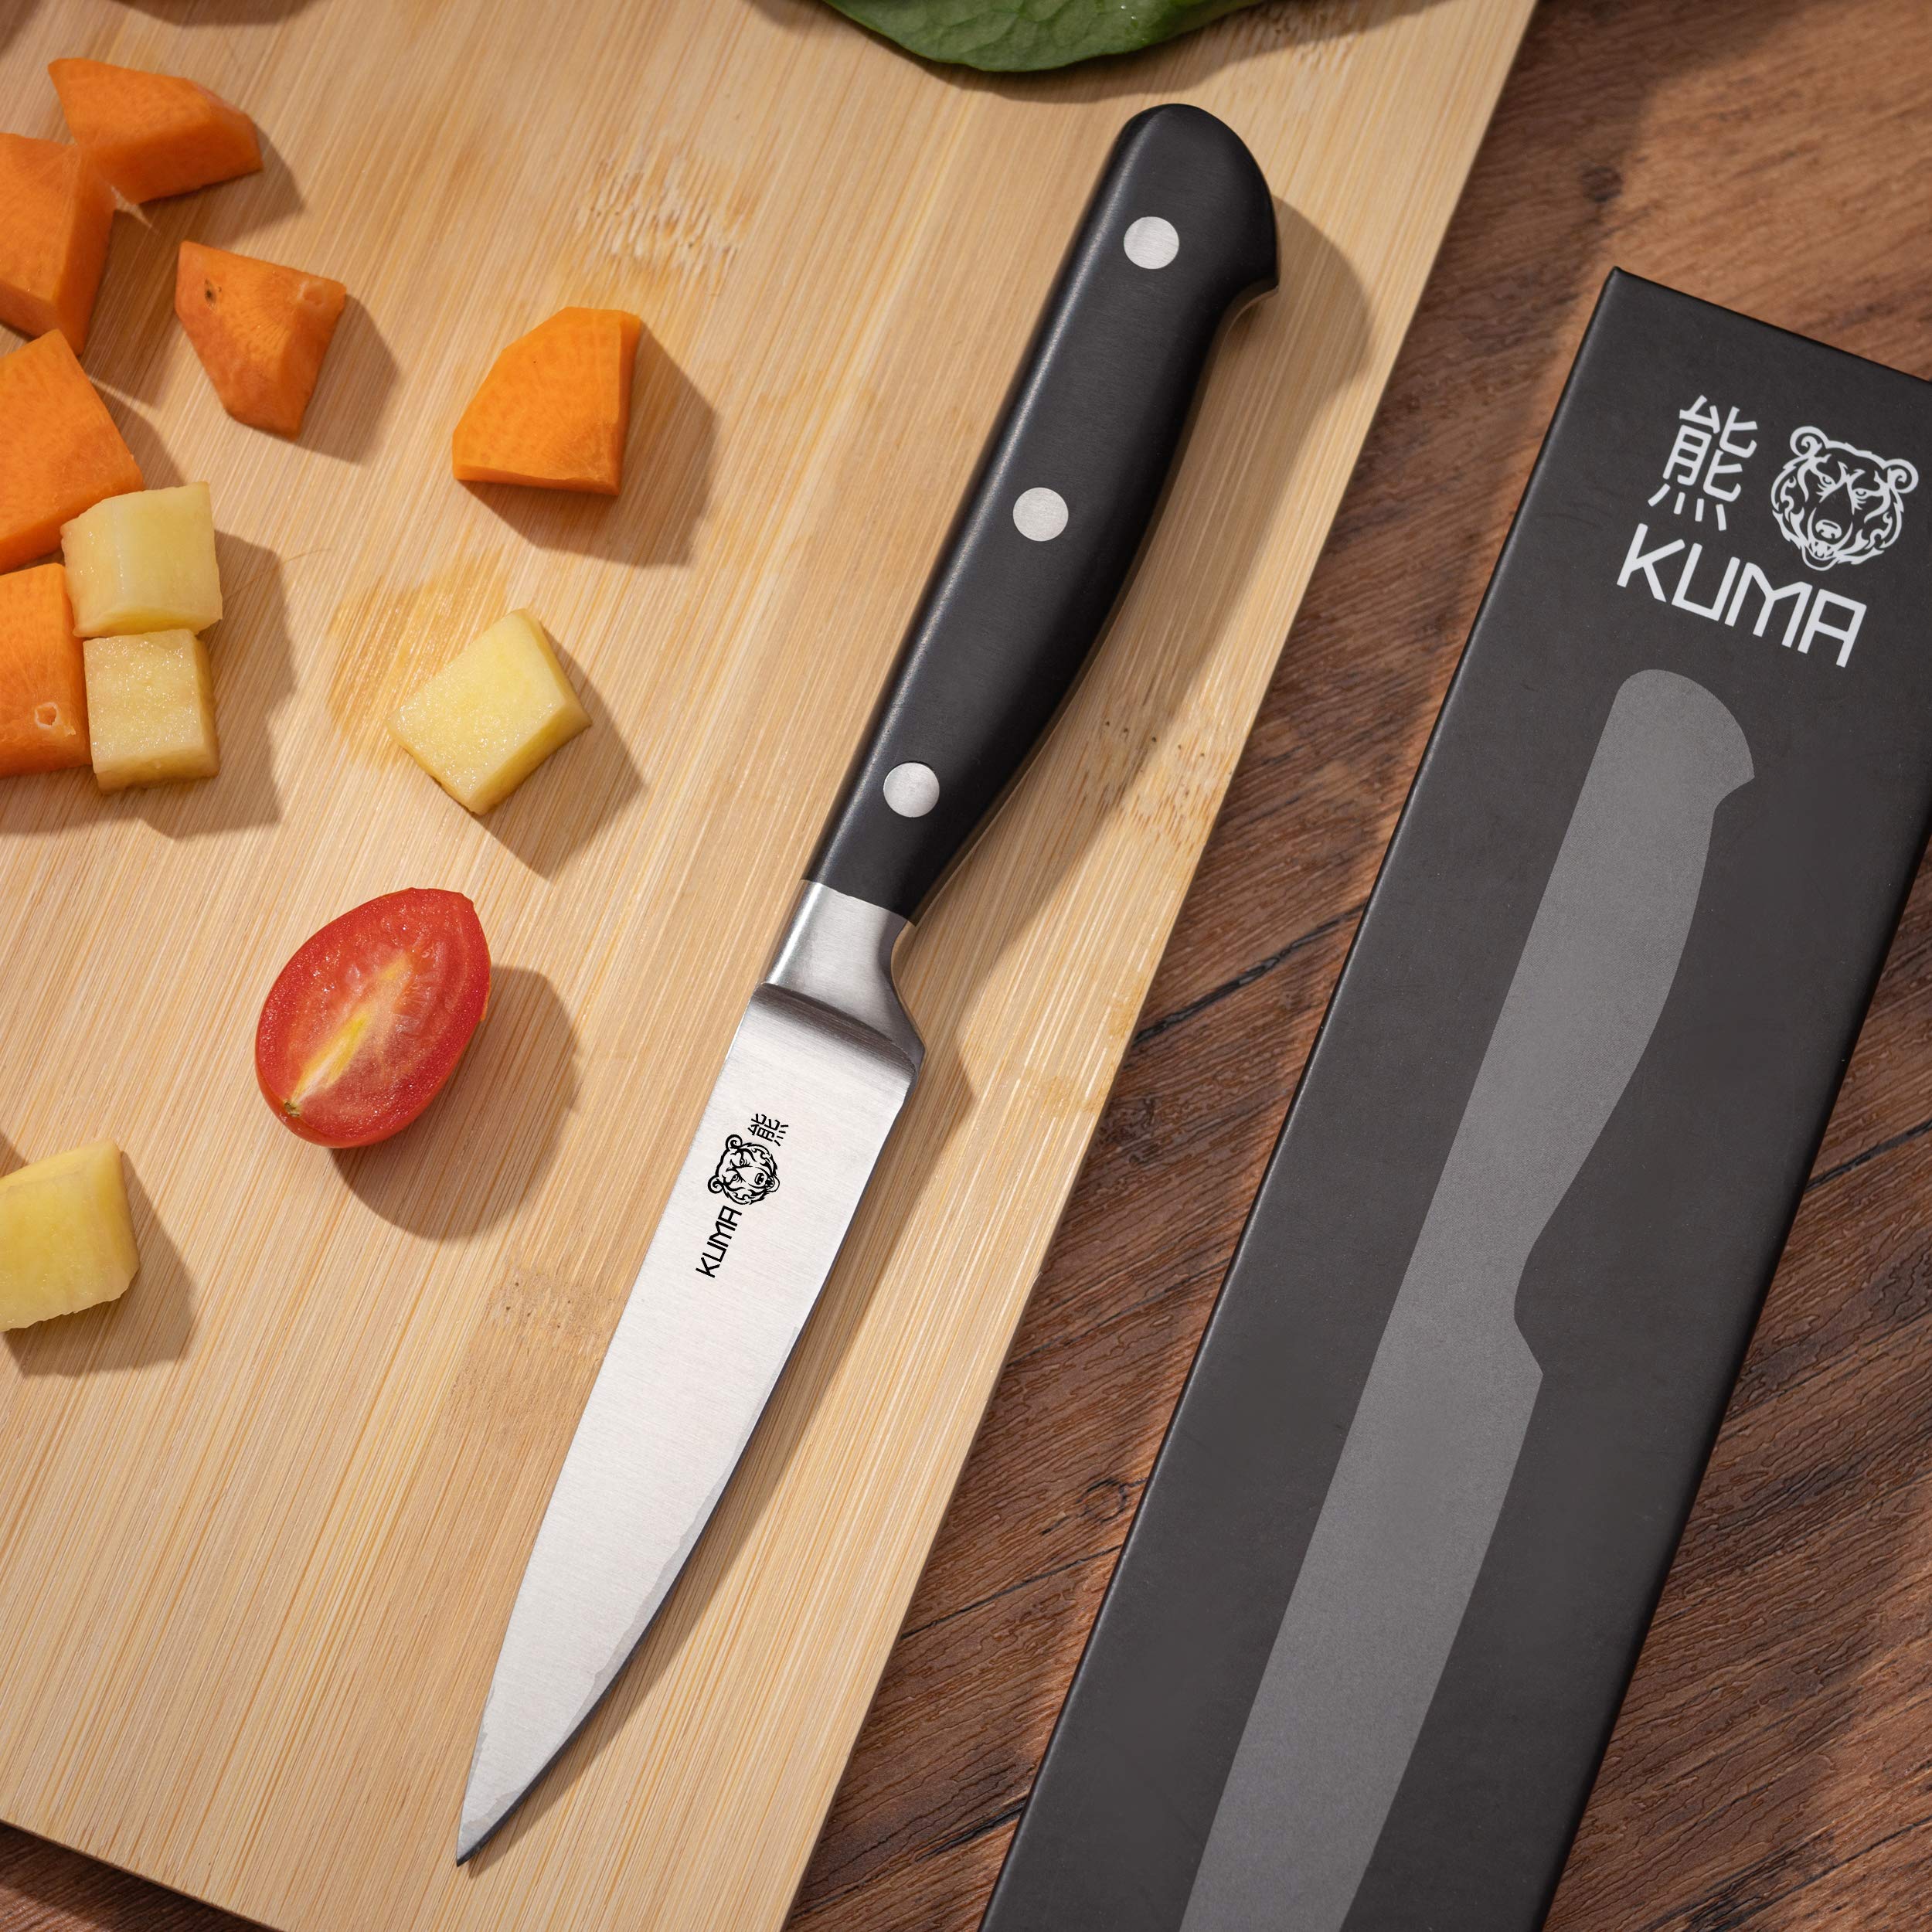 KUMA Essentials Kitchen Knife Set - Classic 3 Piece Collection - 8" Chef's Knife, 3.5" Paring Knife, and 8" Honing Rod - Knives Set Without Block or Roll Bag - Conquer Your Kitchen